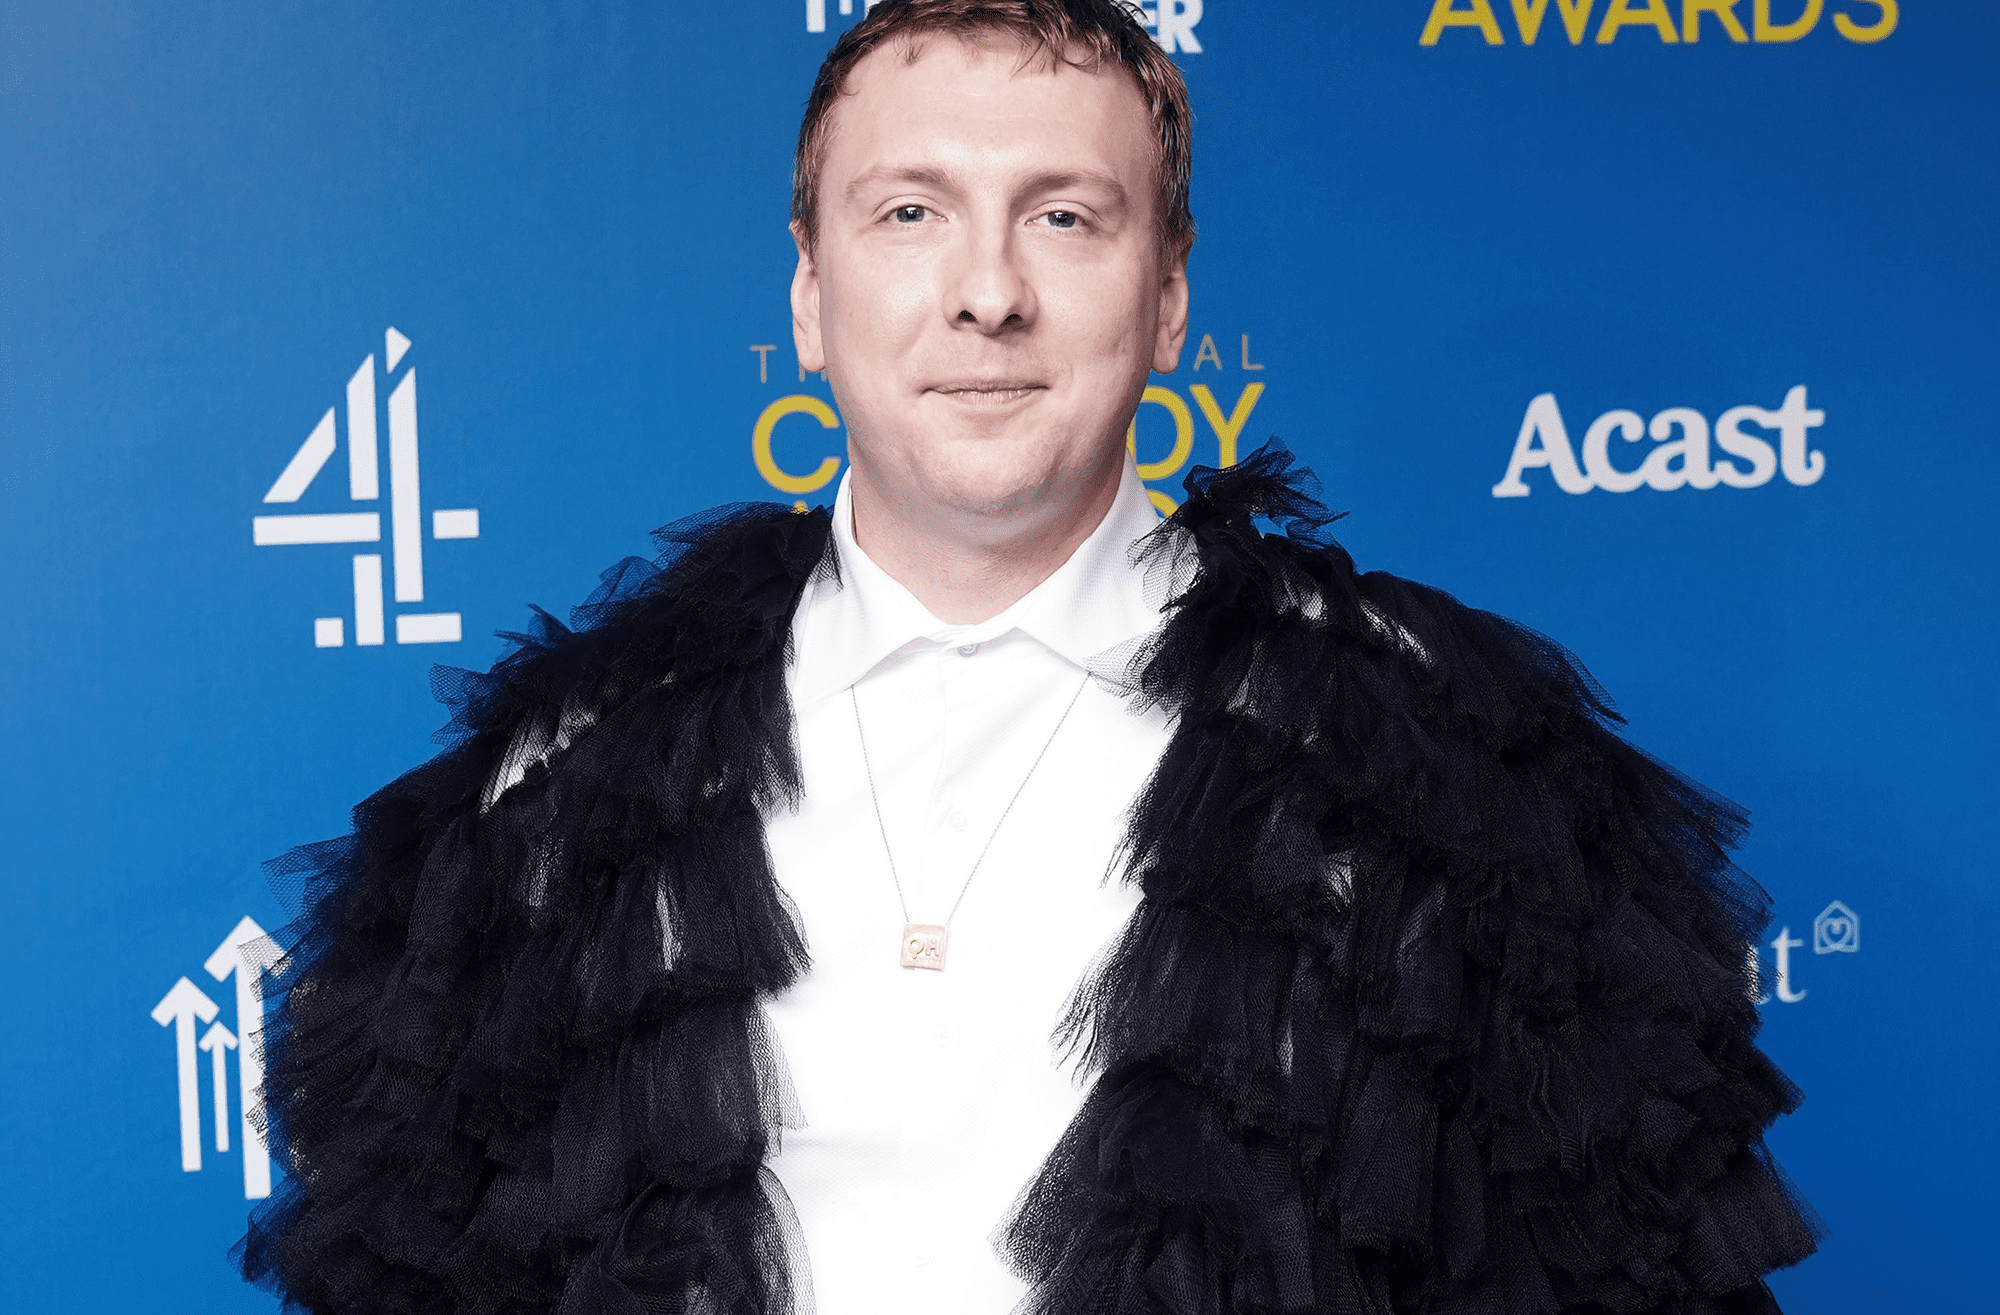 Joe Lycett makes himself available to present Match Of The Day